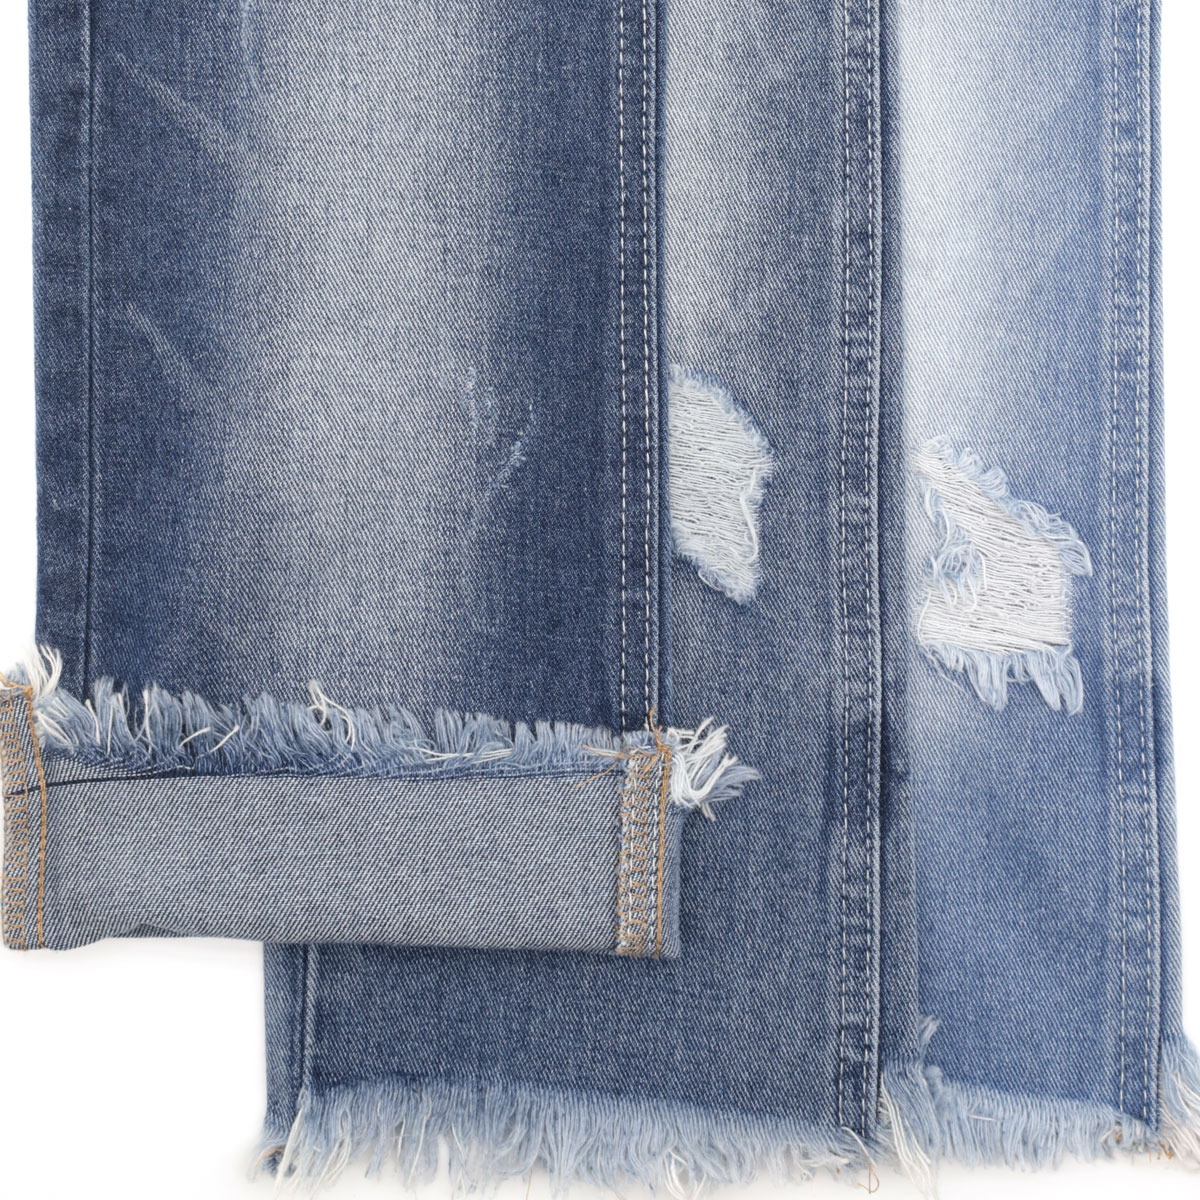 How Long Does It Take for Denim to Air Dry? 2